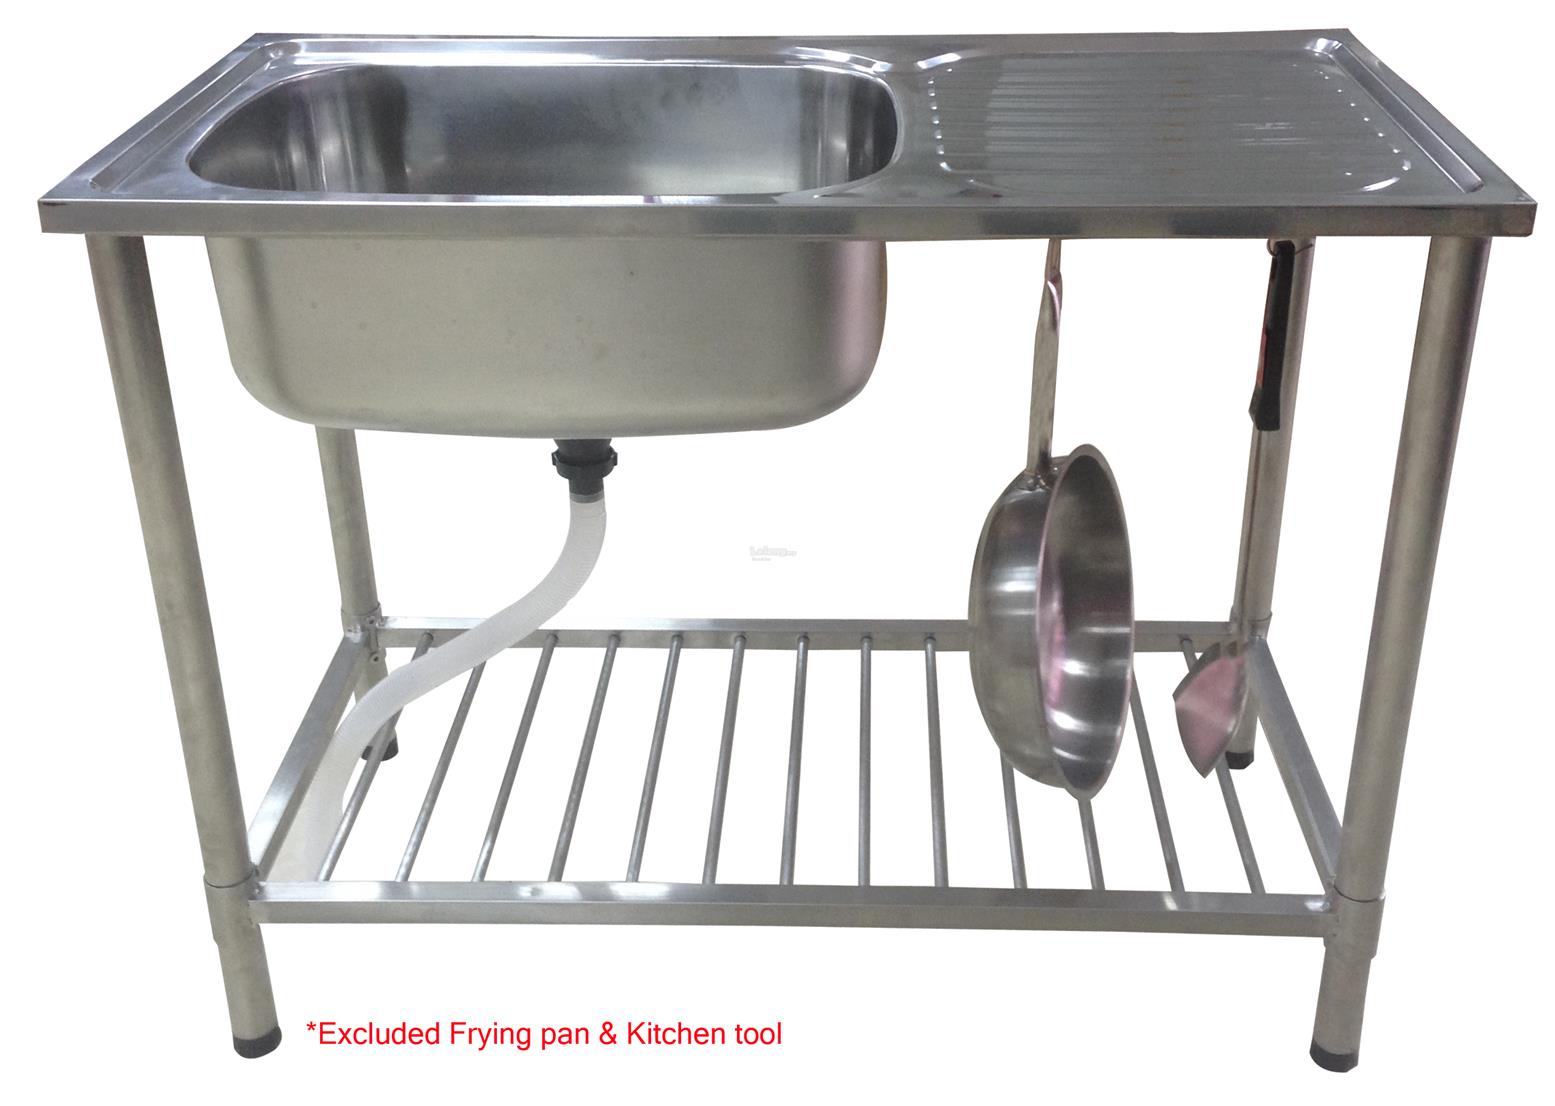 Modern Portable Kitchen Sink With Stand Philippines for Large Space